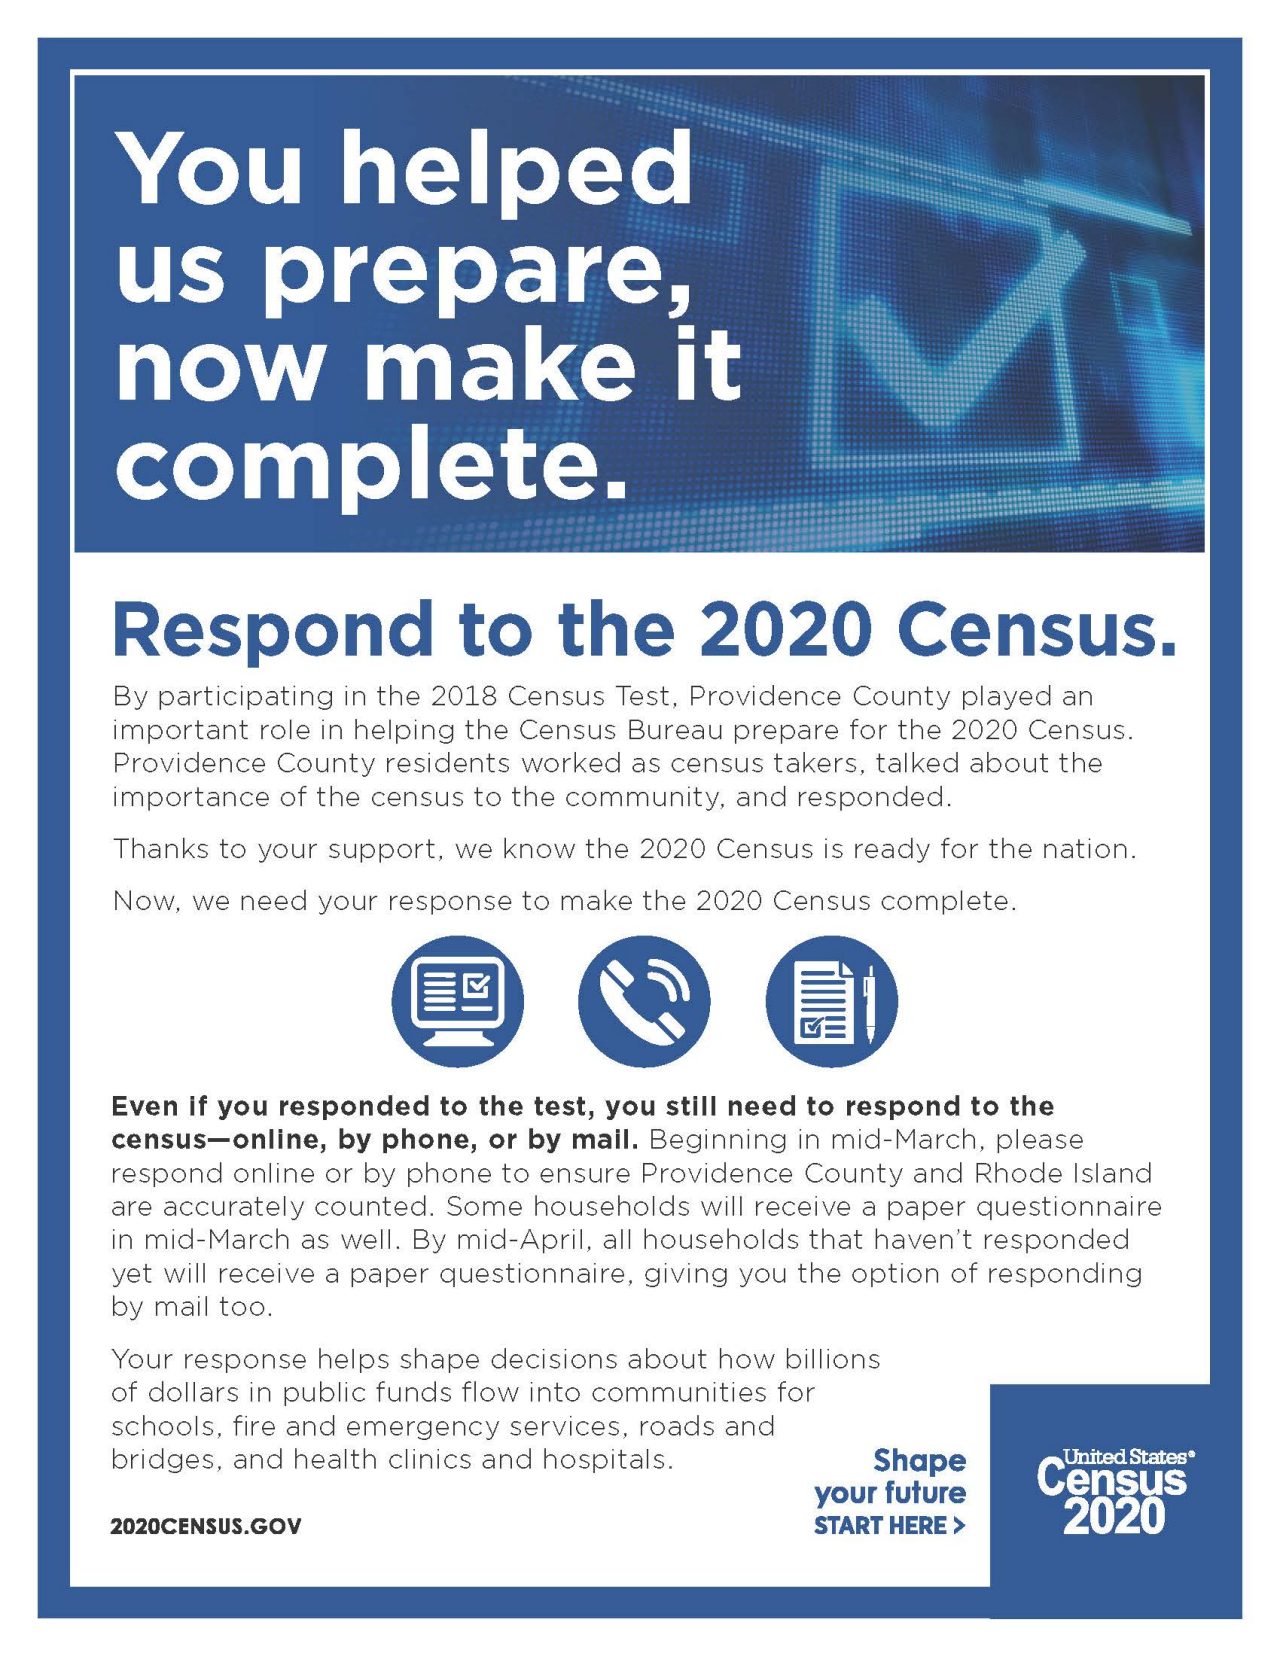 Respond to the 2020 Census.